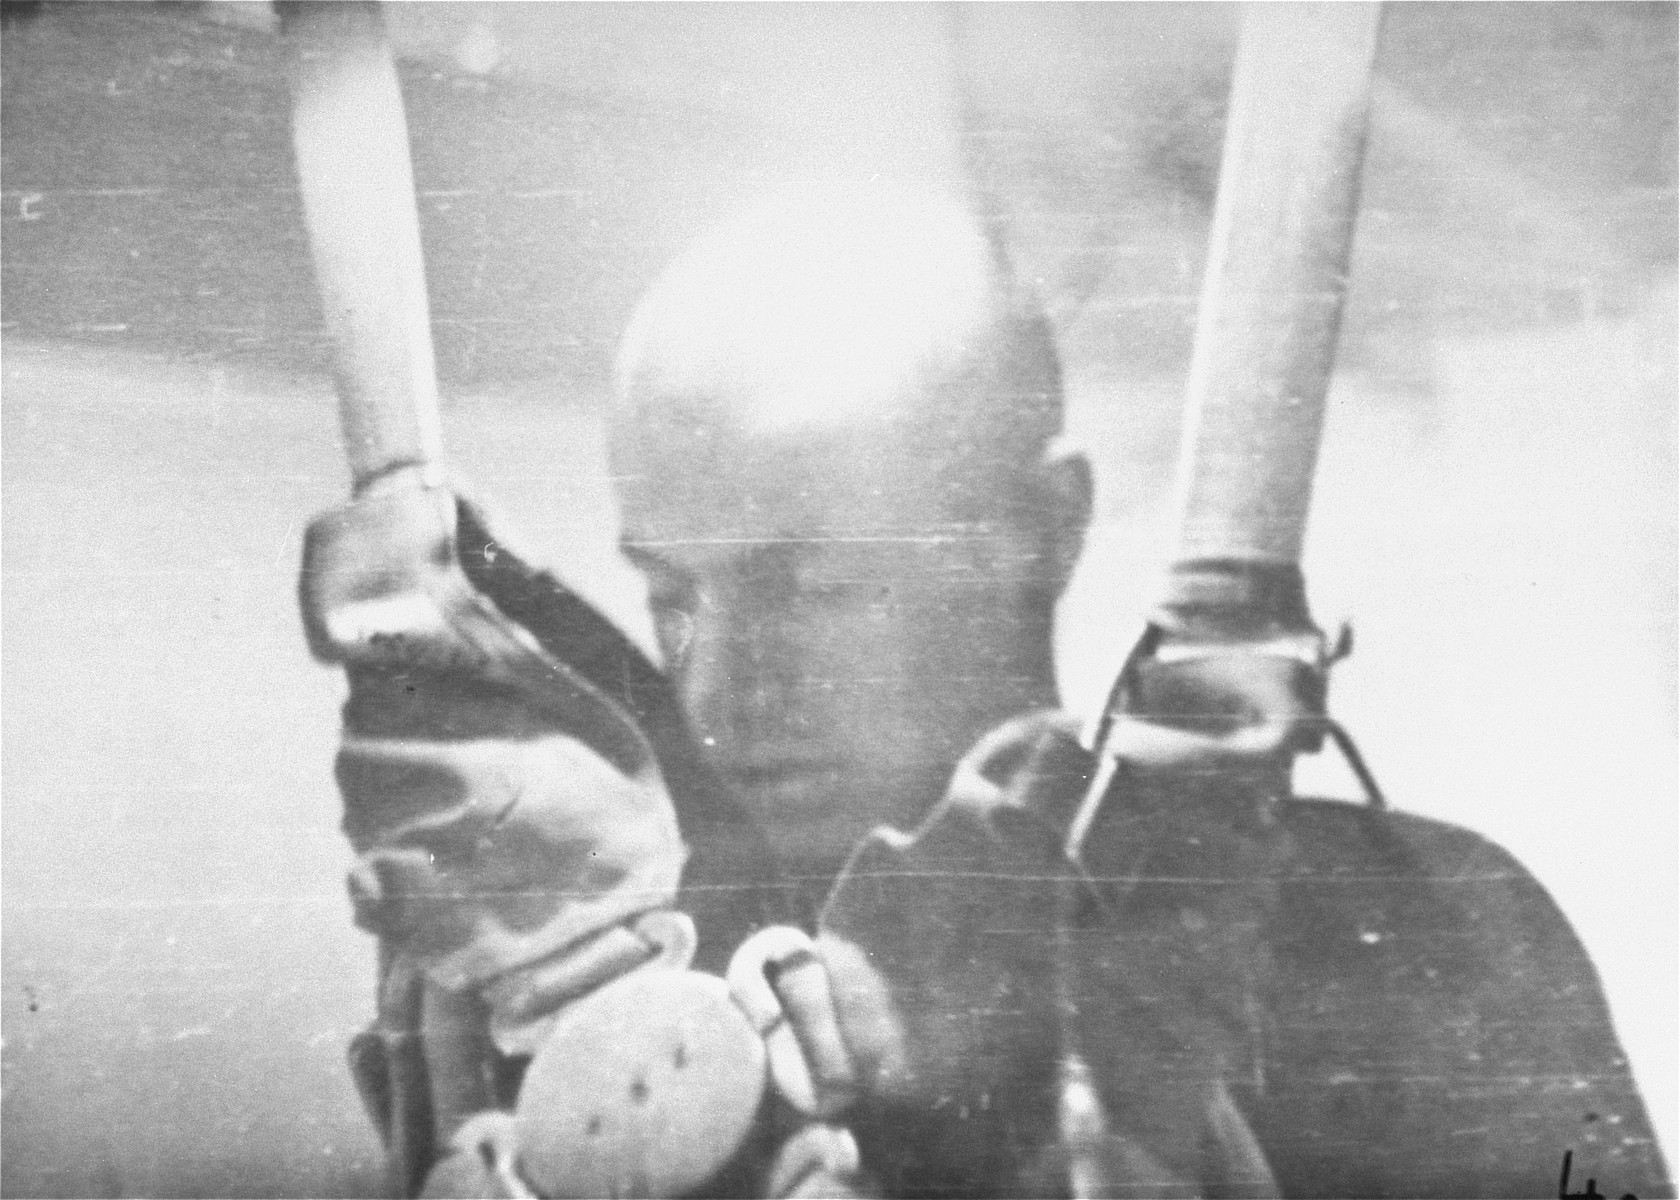 A prisoner in a special chamber falls into unconsciousness after being subjected to low pressure experimentation.  For the benefit of the Luftwaffe, air pressures were created comparable to those found at 15,000 meters in altitute, in an effort to determine how high German pilots could fly and survive.